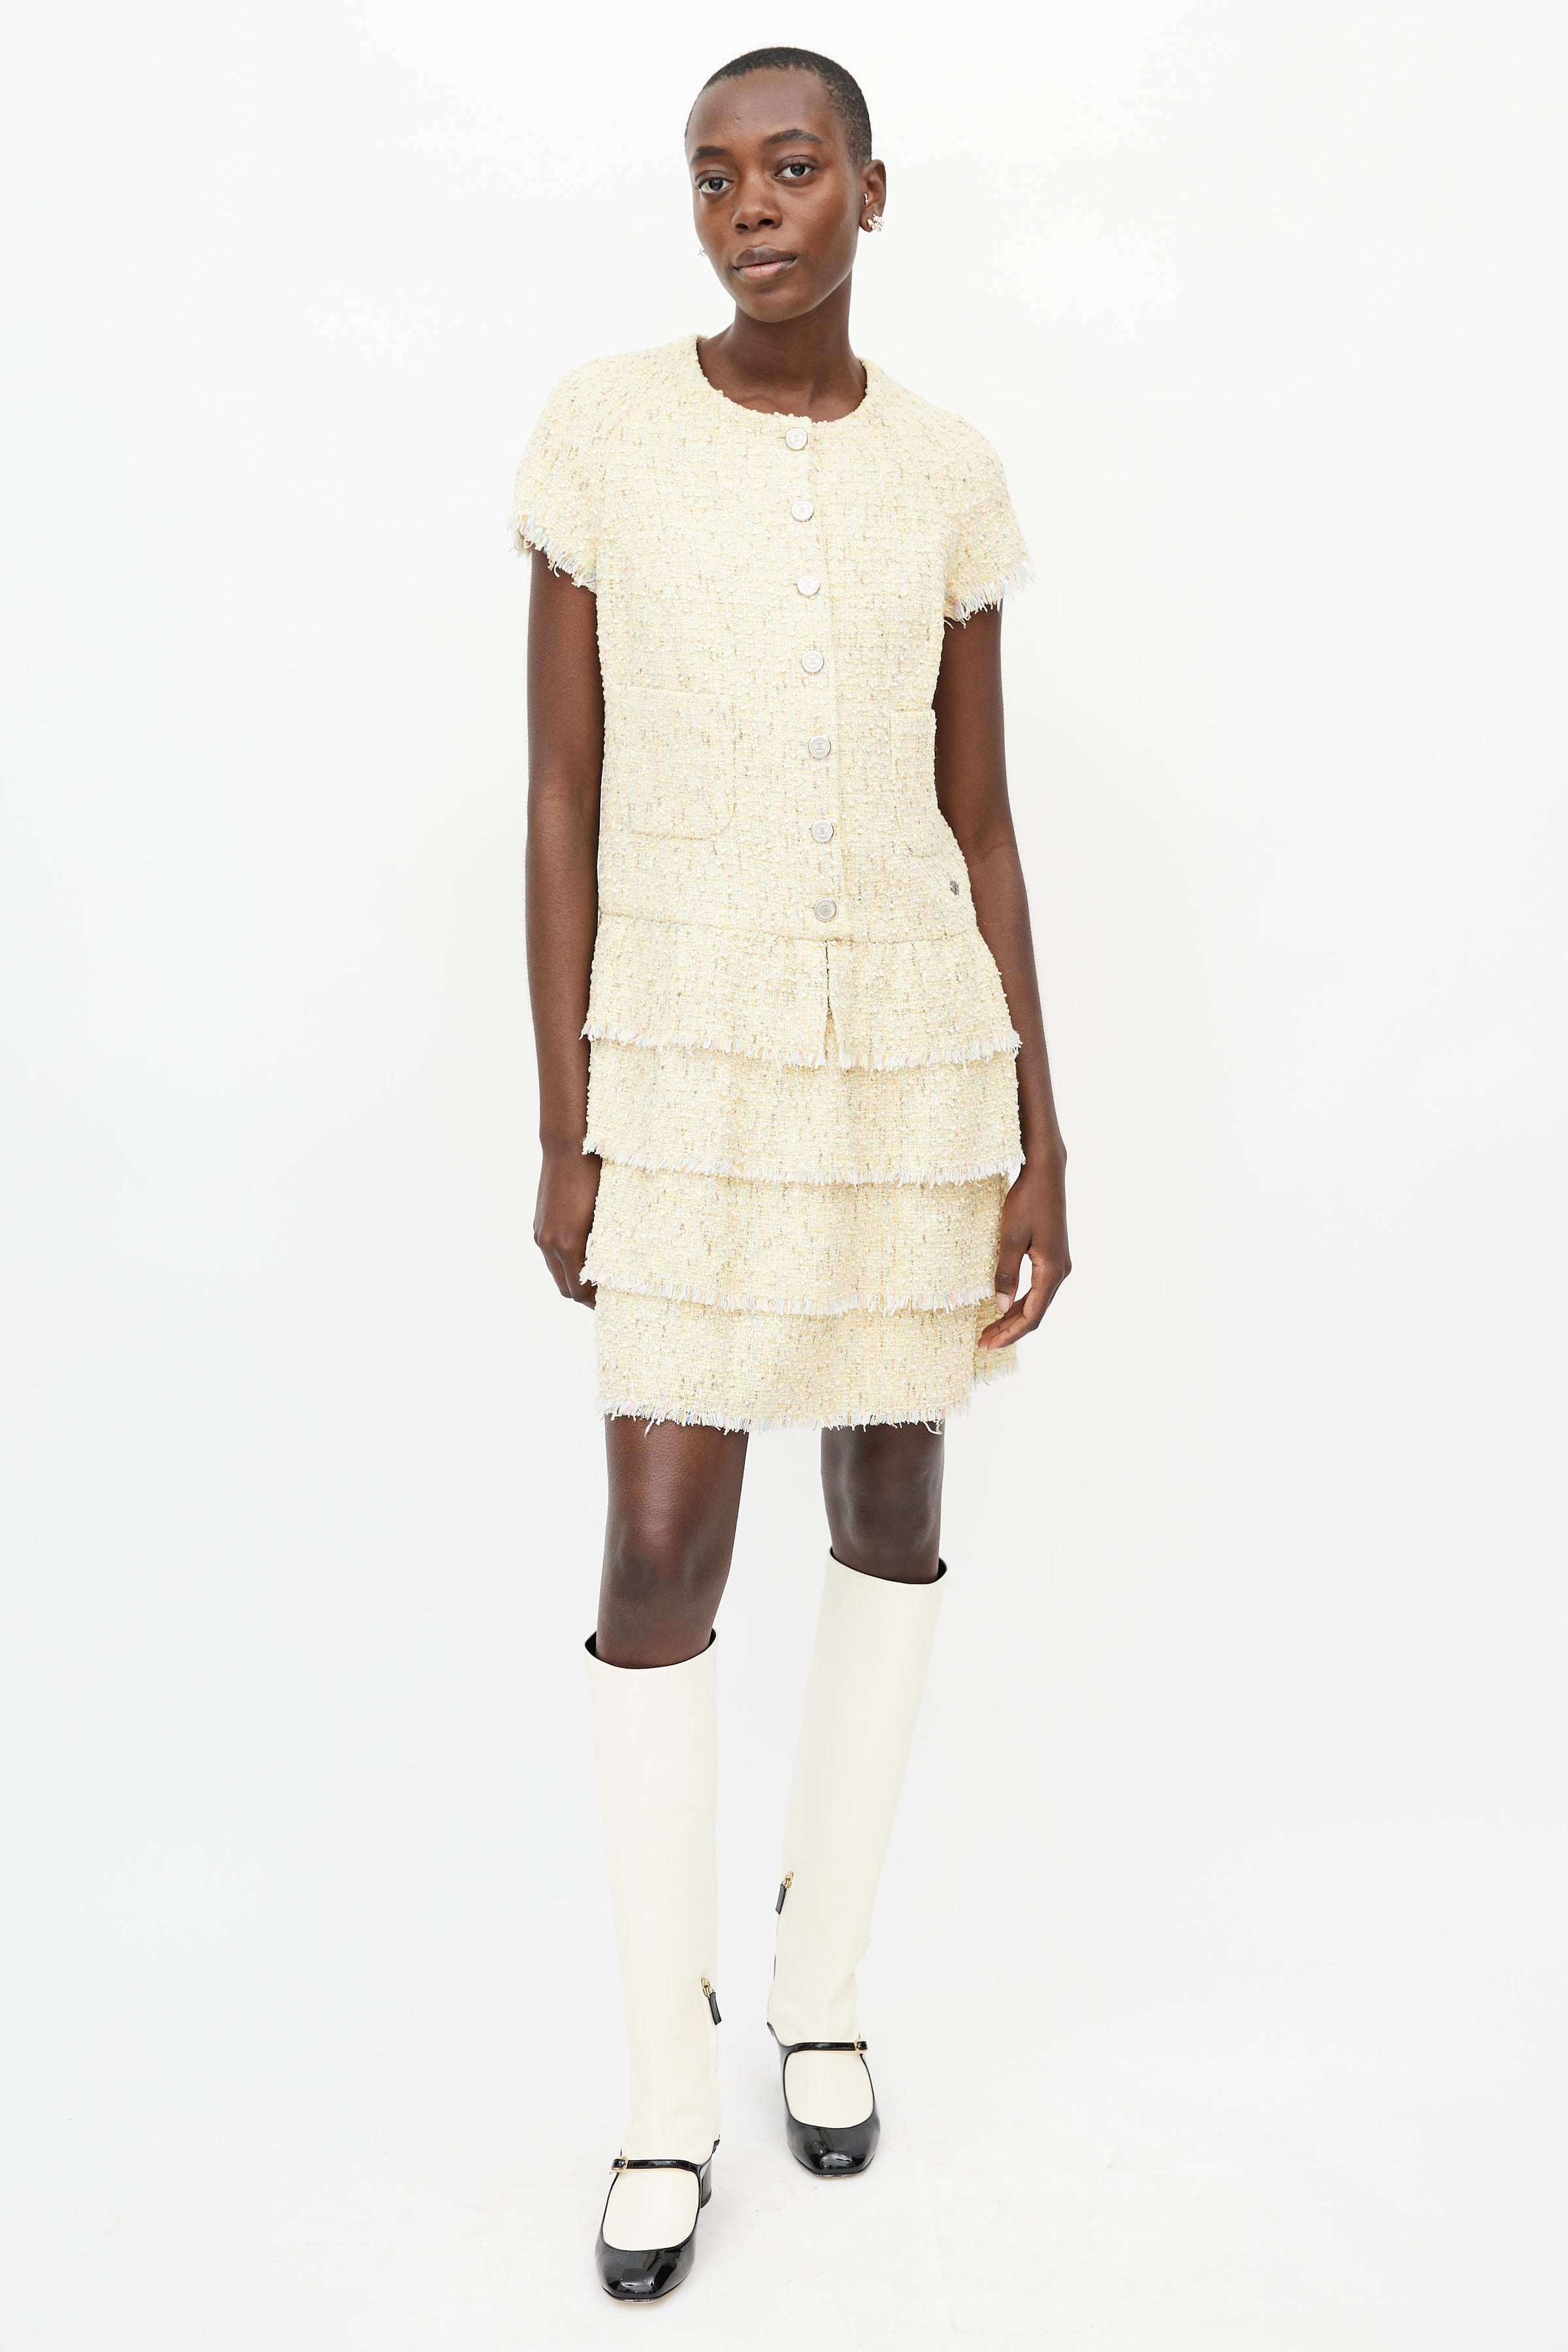 Chanel Ruffle and Pearl Embellished Tweed Ankle-Length Dress — UFO